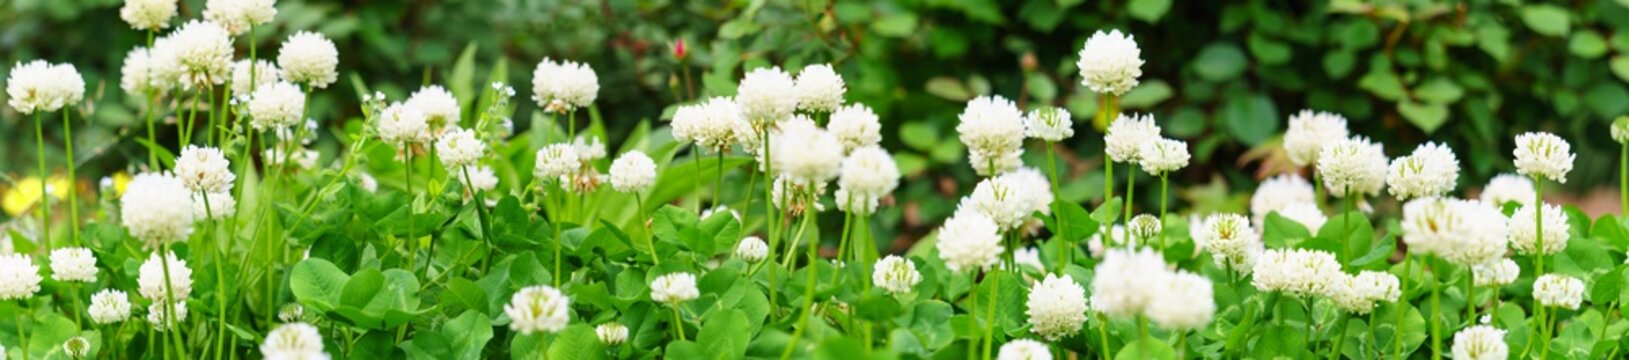 Panoramic view of white clover flowers on green color bokeh background	
